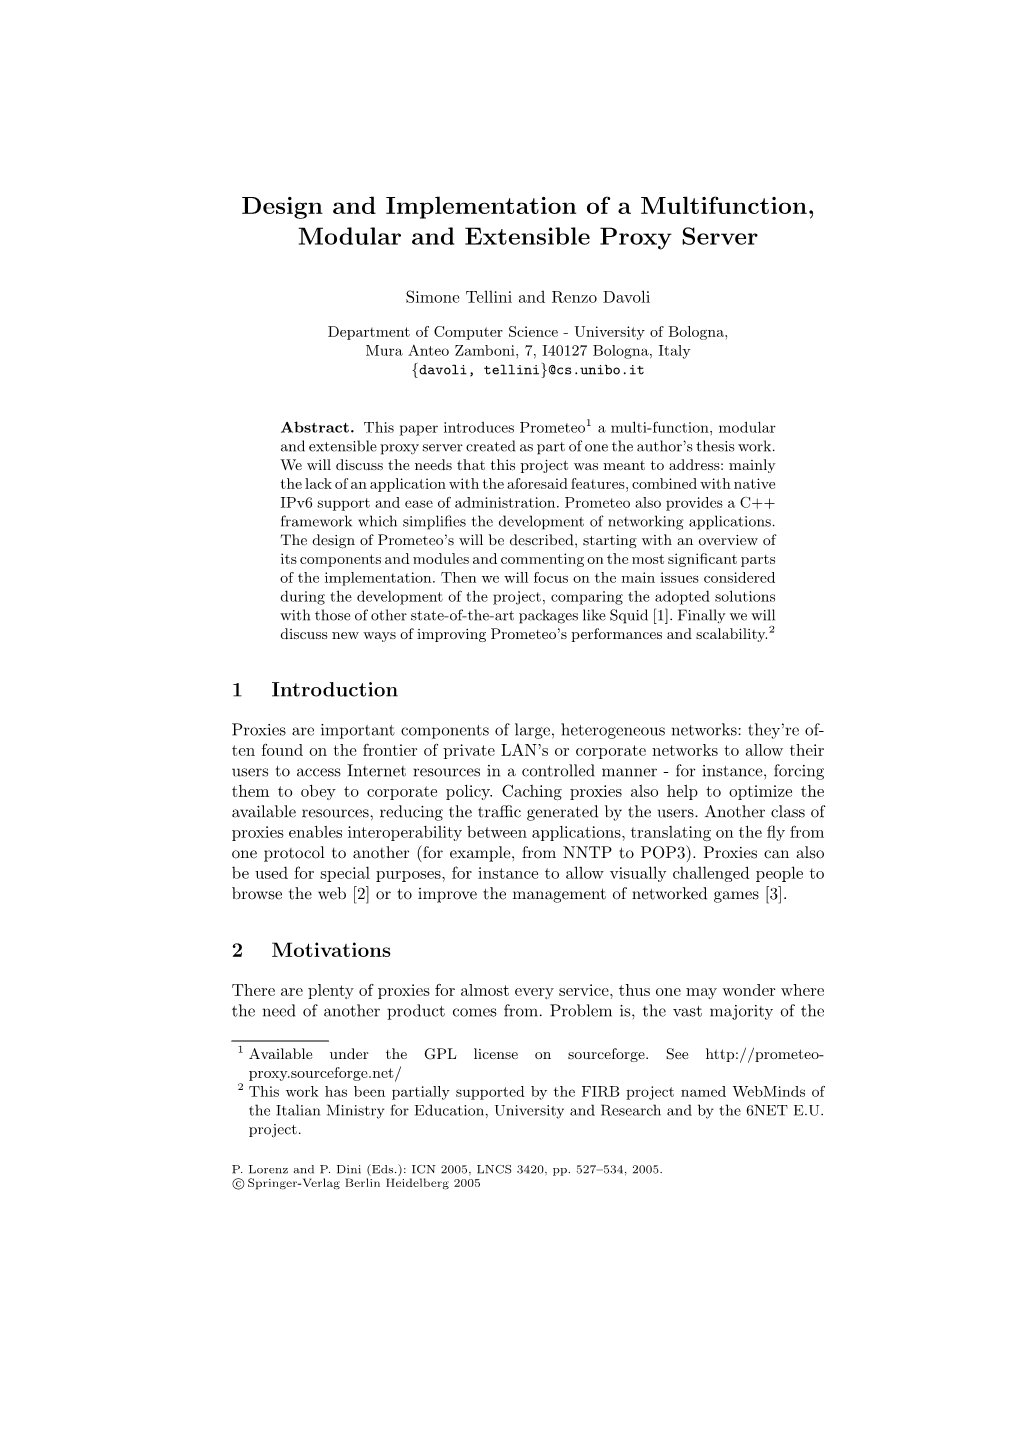 Design and Implementation of a Multifunction, Modular and Extensible Proxy Server